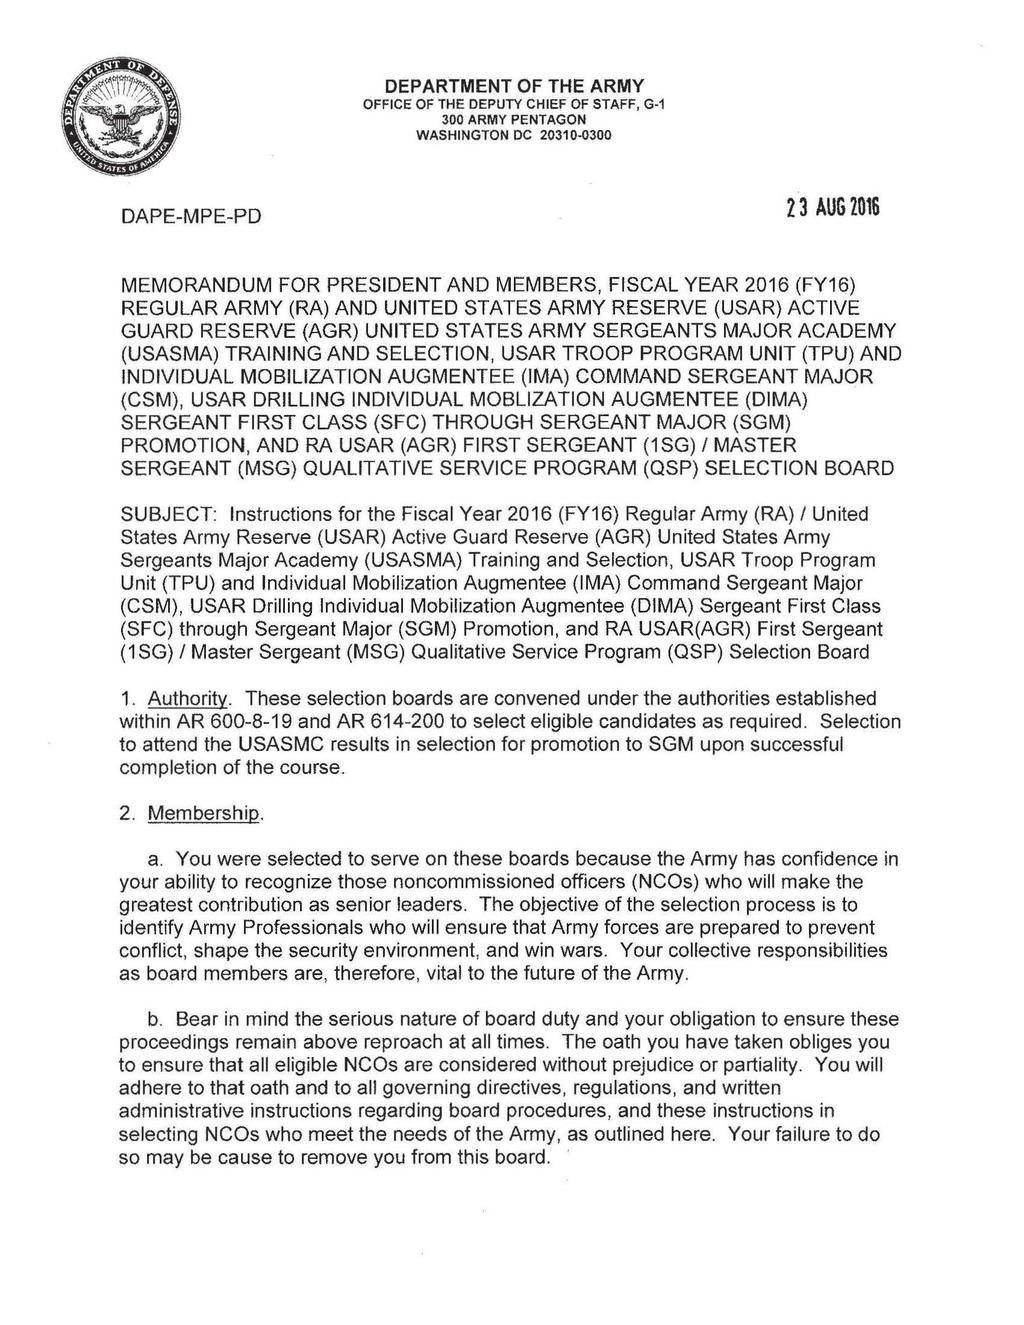 DEPARTMENT OF THE ARMY OFFICE OF THE DEPUTY CHIEF OF STAFF, G-1 300 ARMY PENTAGON WASHINGTON DC 20310-0300 DAPE-MPE-PD 23 AUG 2016 MEMORANDUM FOR PRESIDENT AND MEMBERS, FISCAL YEAR 2016 (FY16)